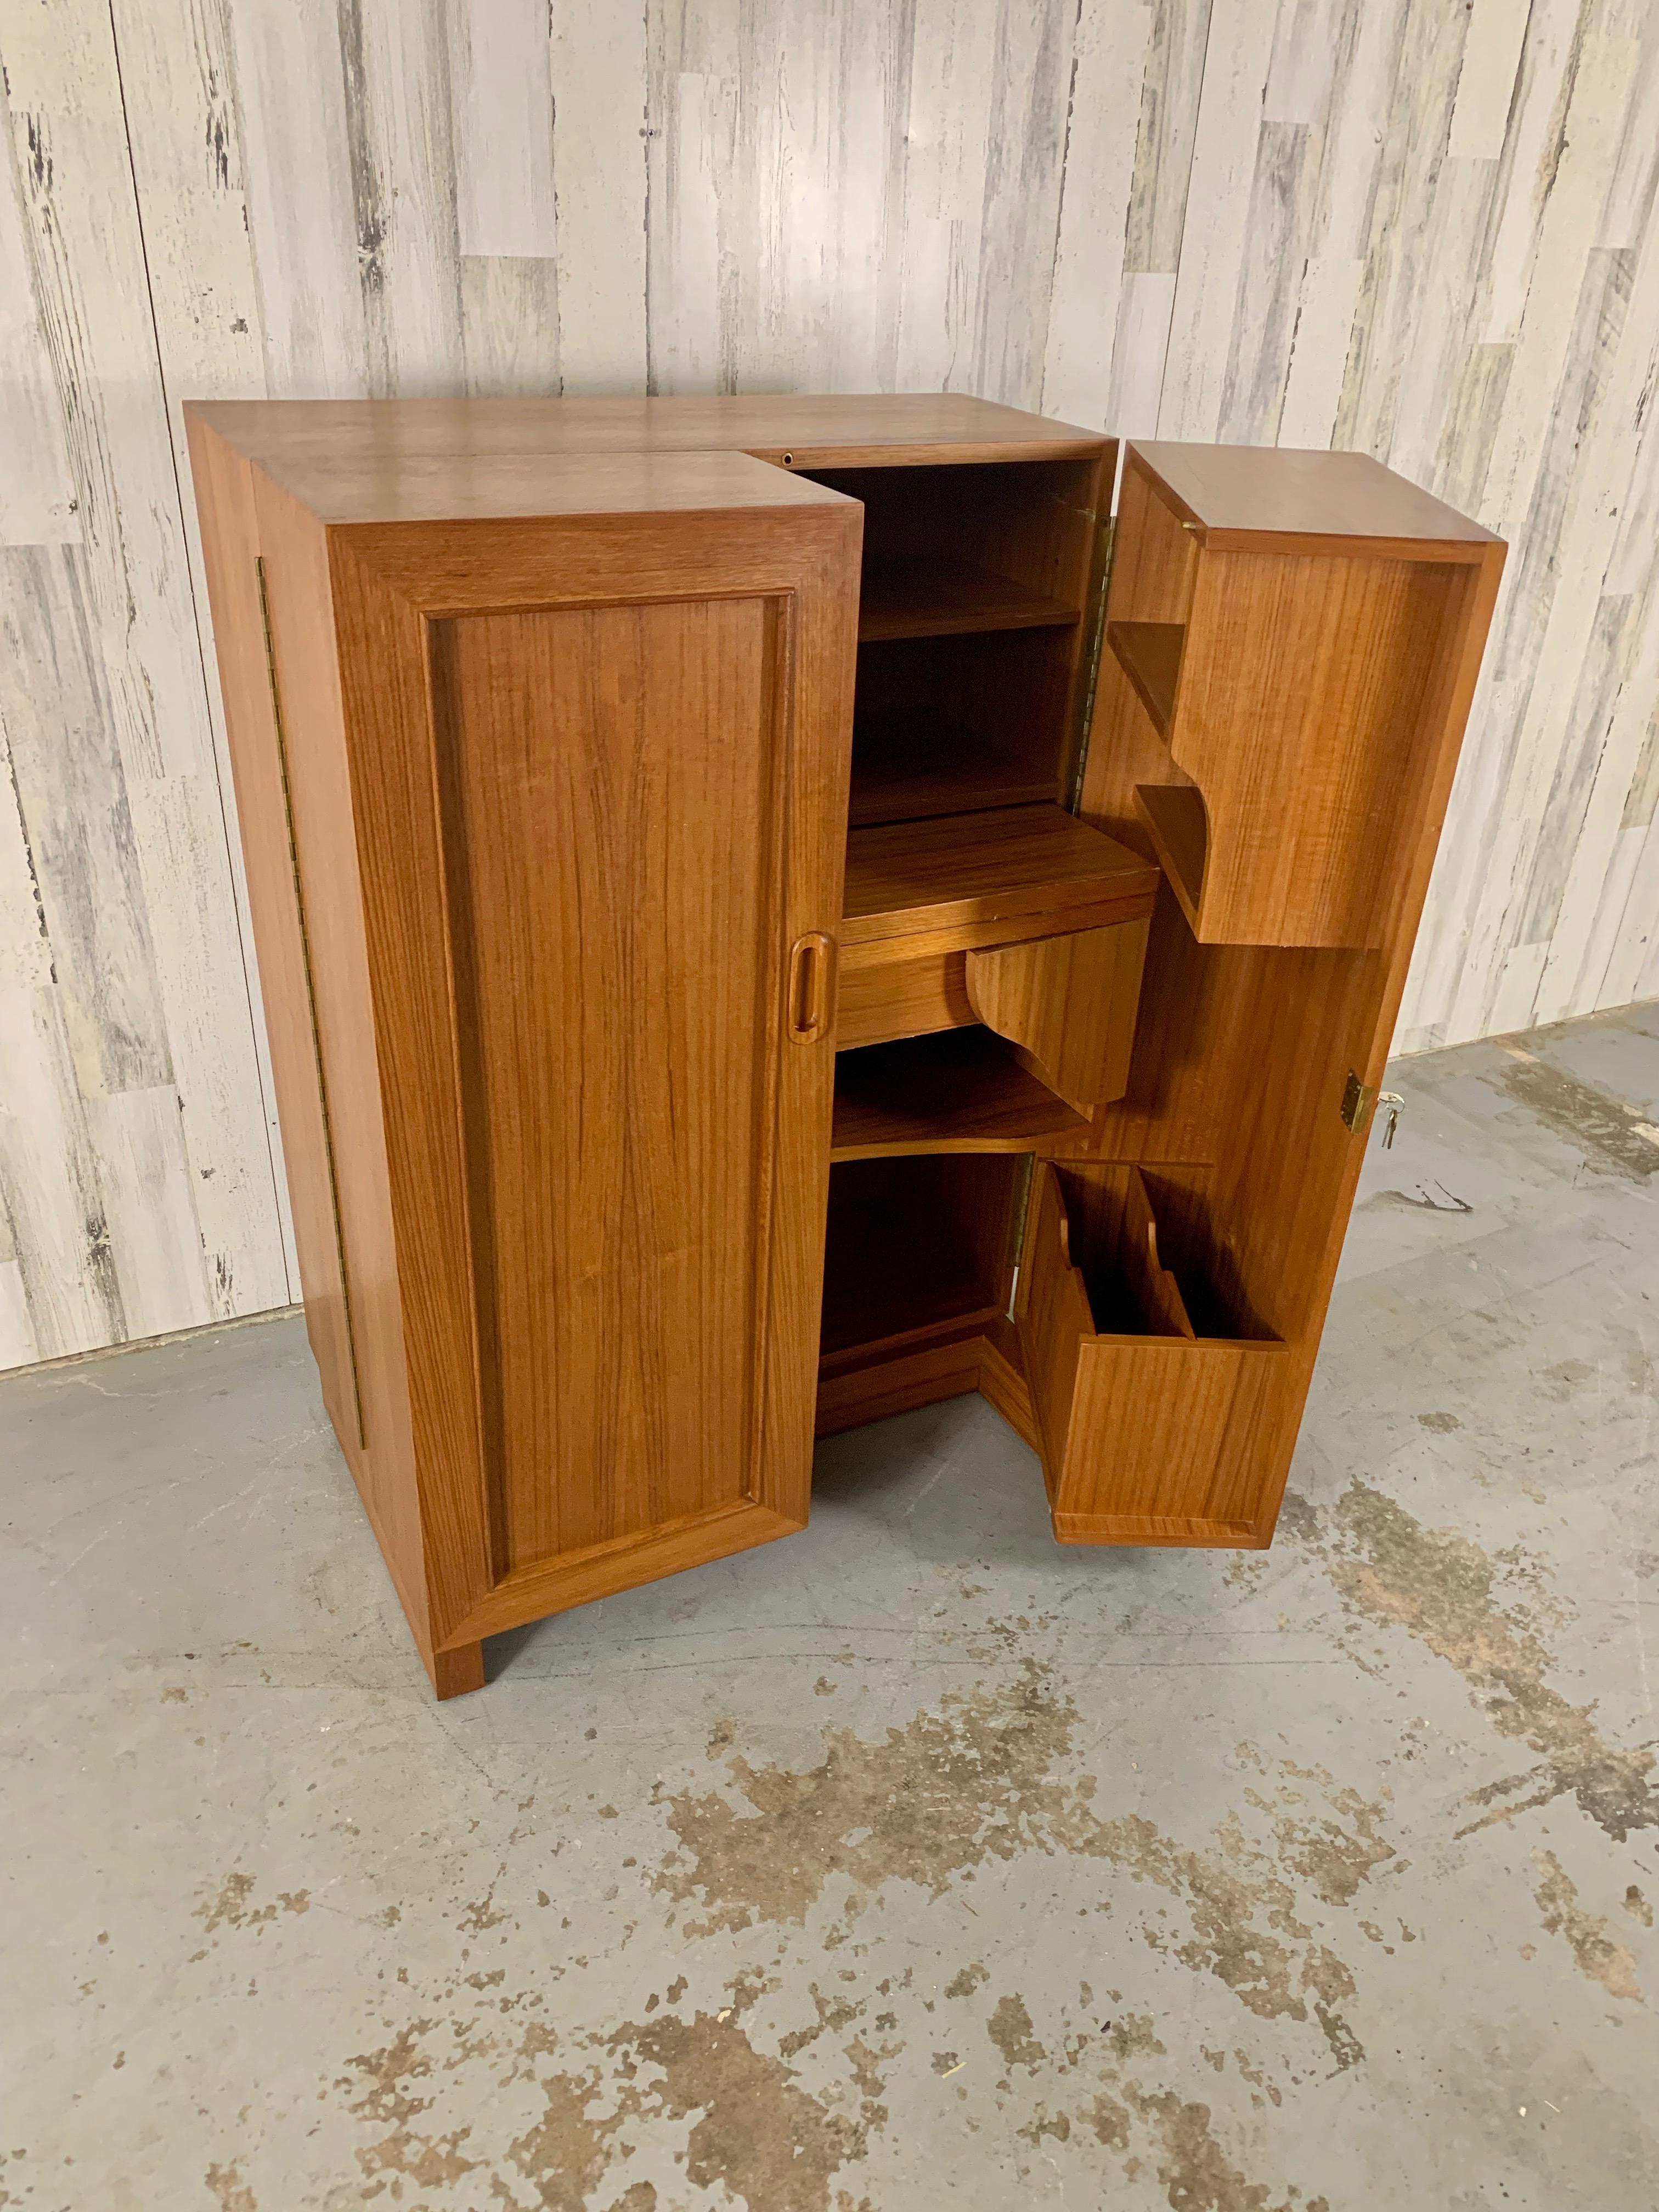 Convertible cabinet that opens to a large desk with multiple cubby’s and file storage. There are two keys for the door and drawer.